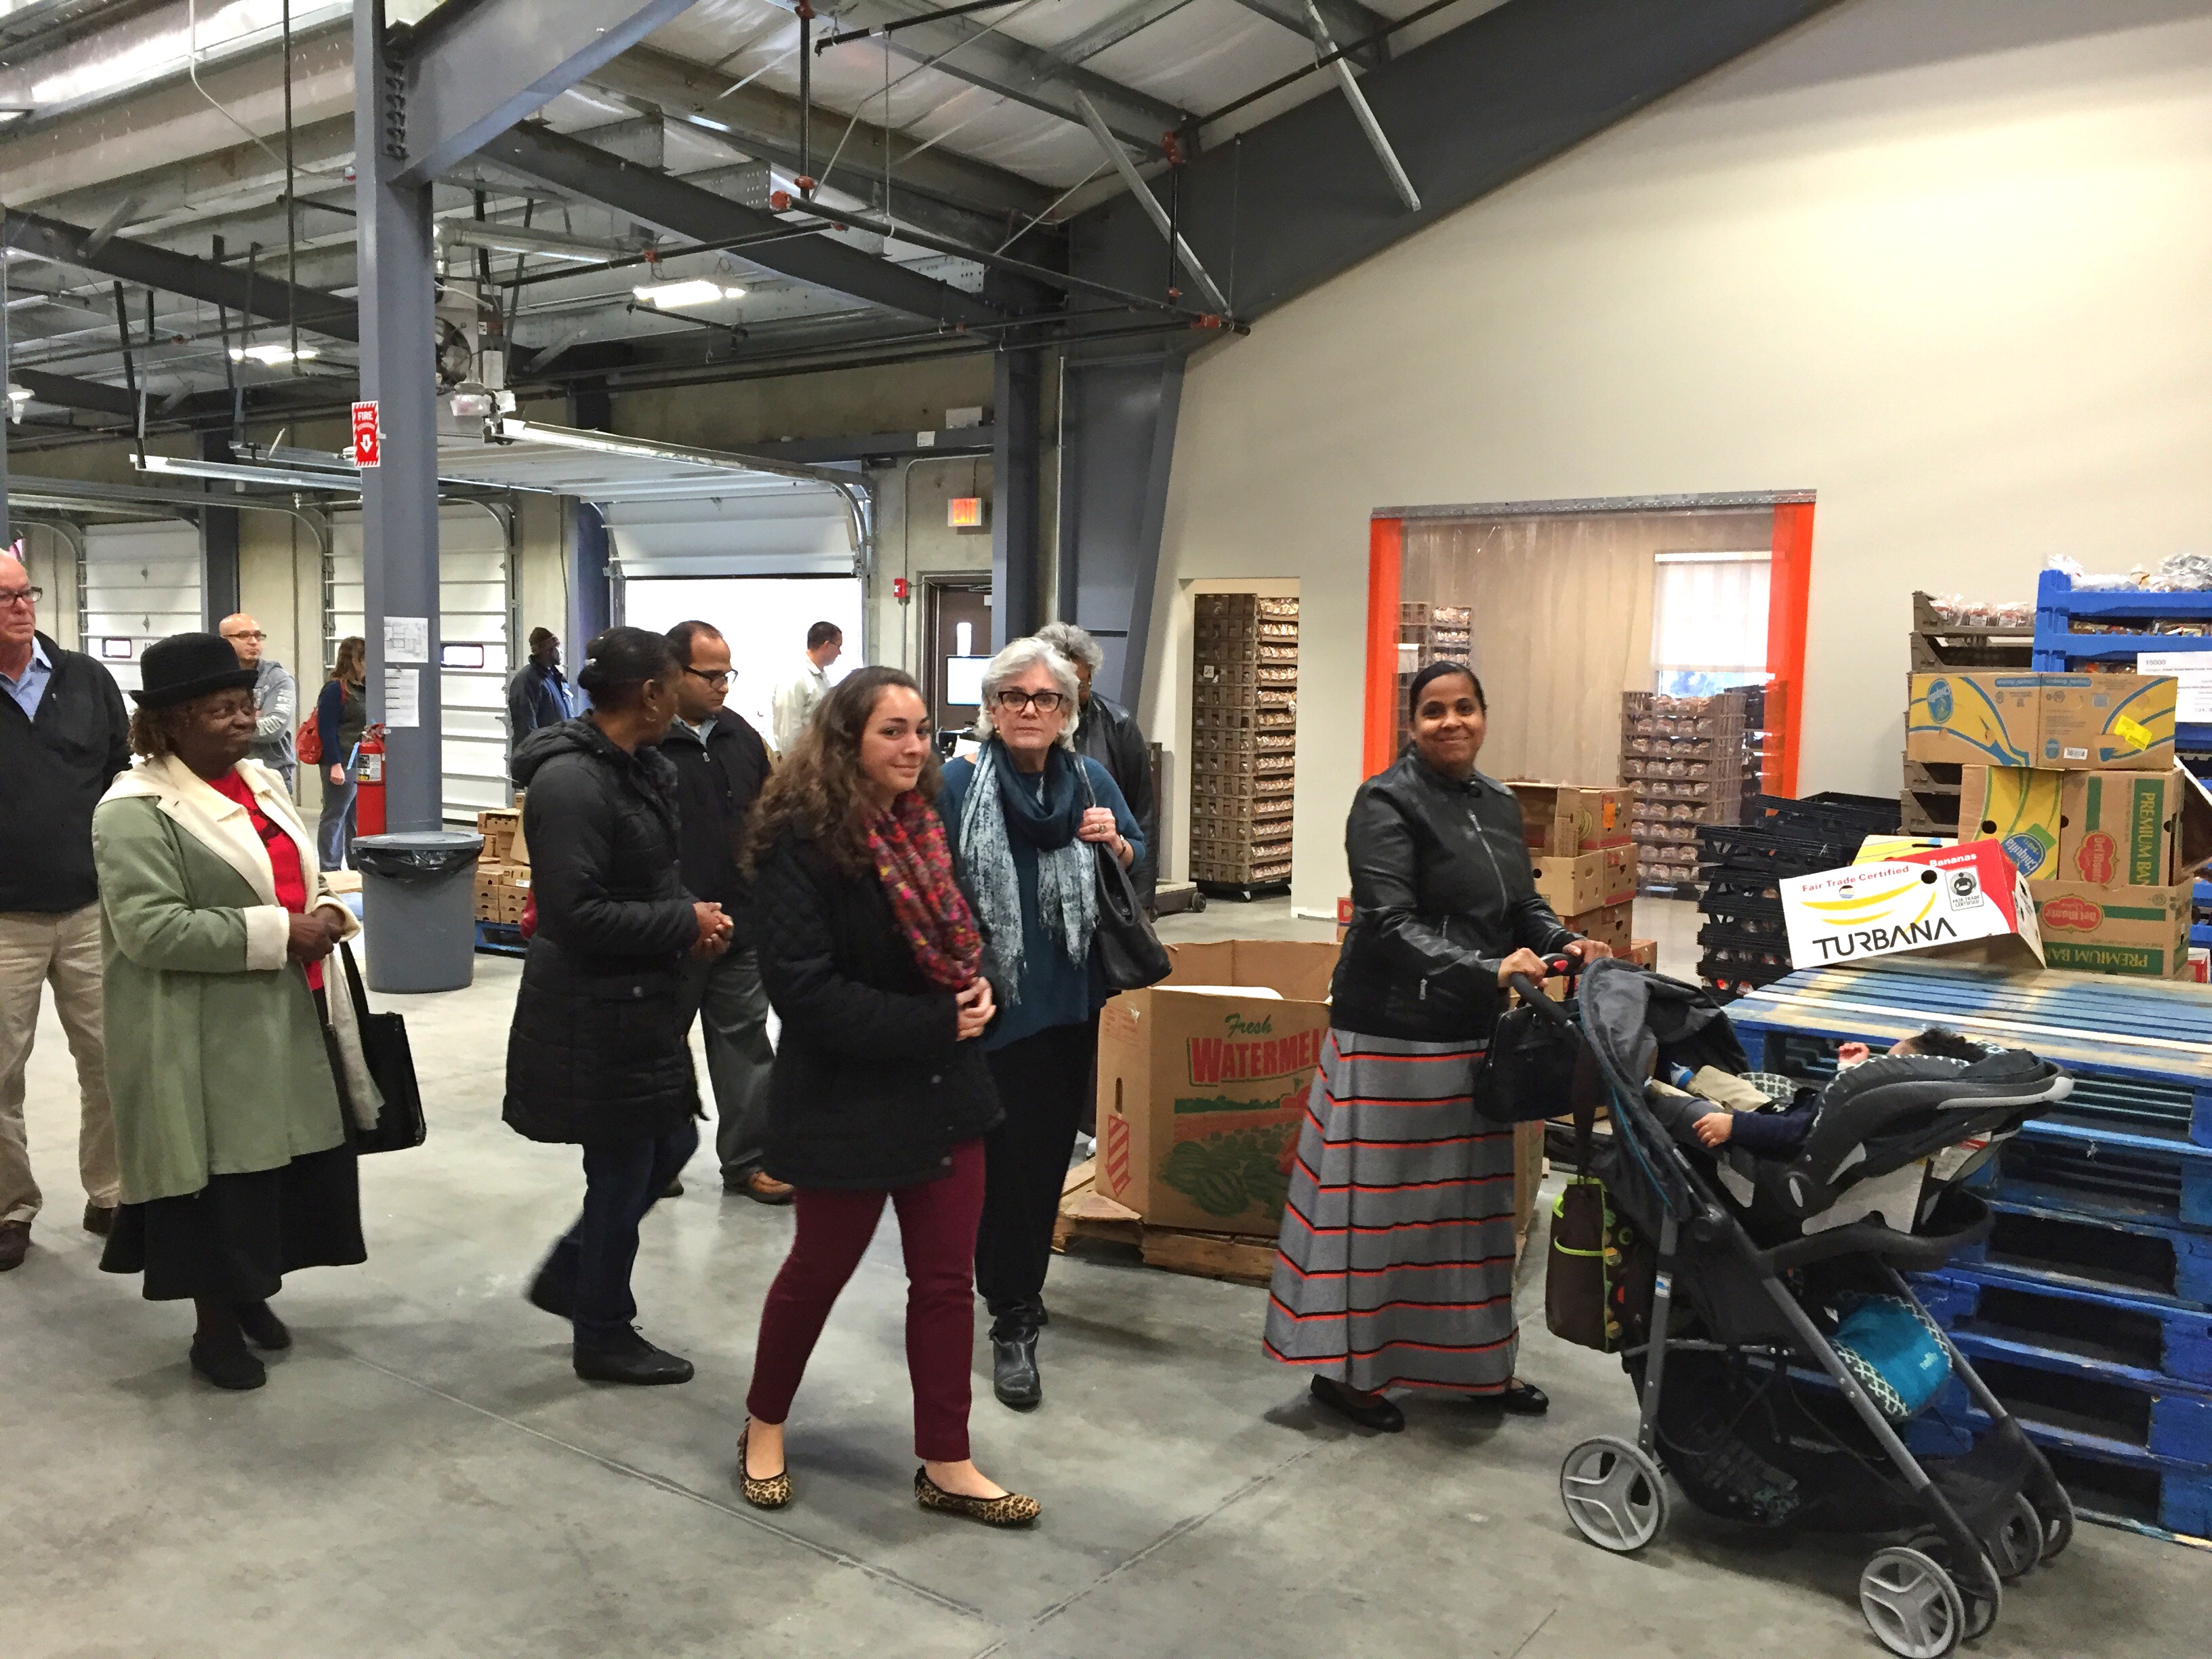 Member programs touring the main warehouse space in our new Wallingford distribution center. Note the future community leader in the stroller at right!